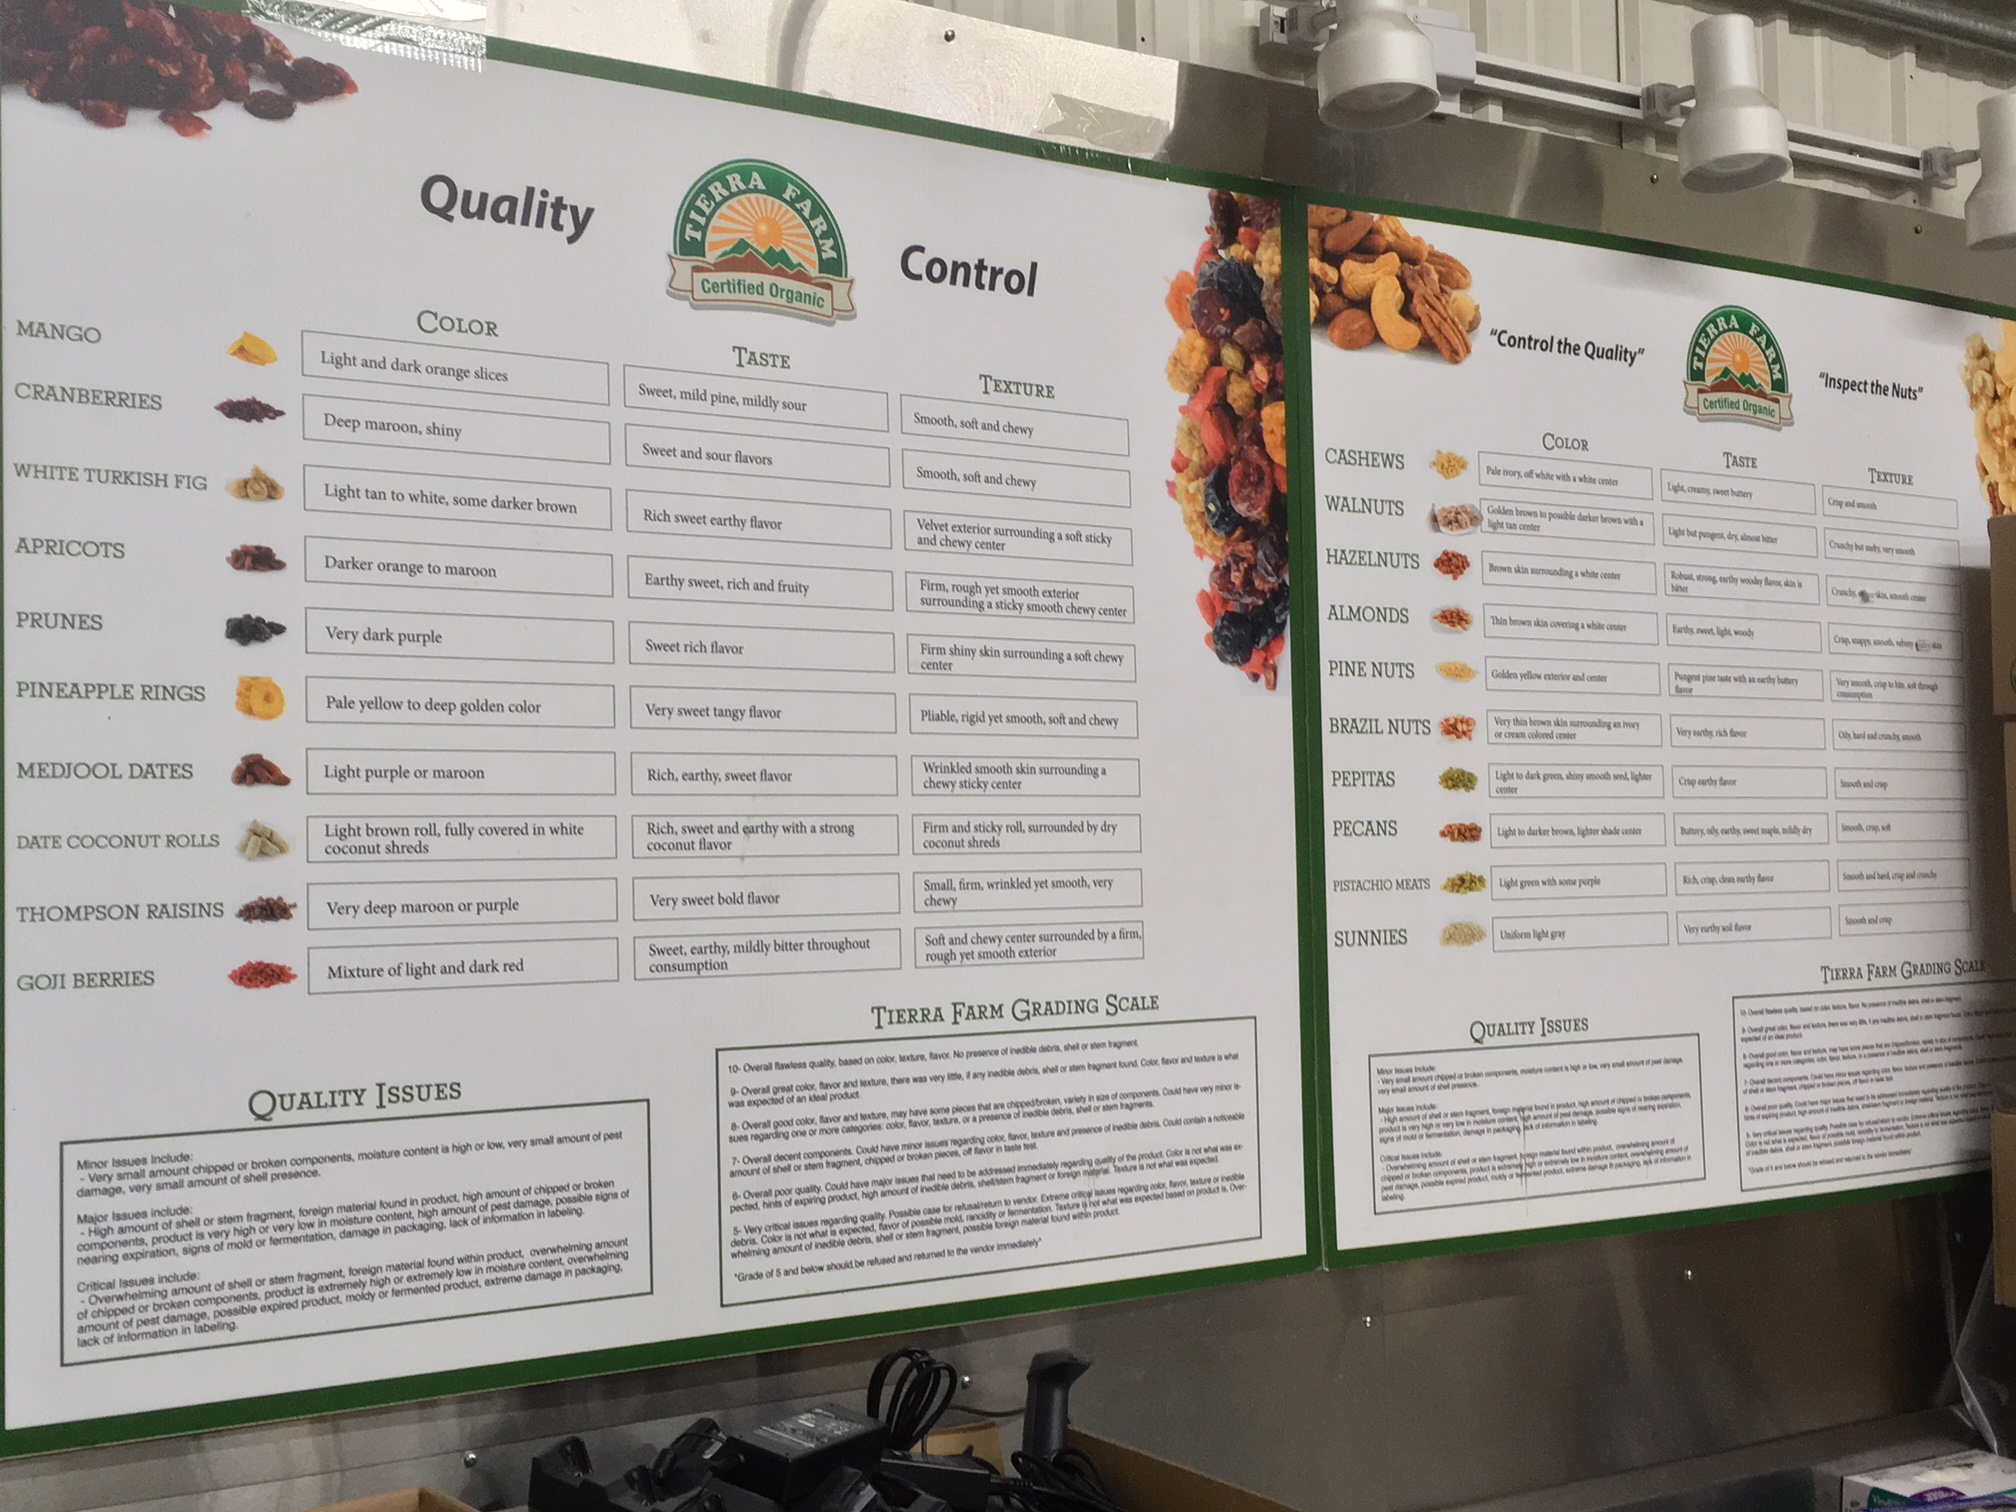 Tierra Farm’s Quality Control standards developed over years of experience